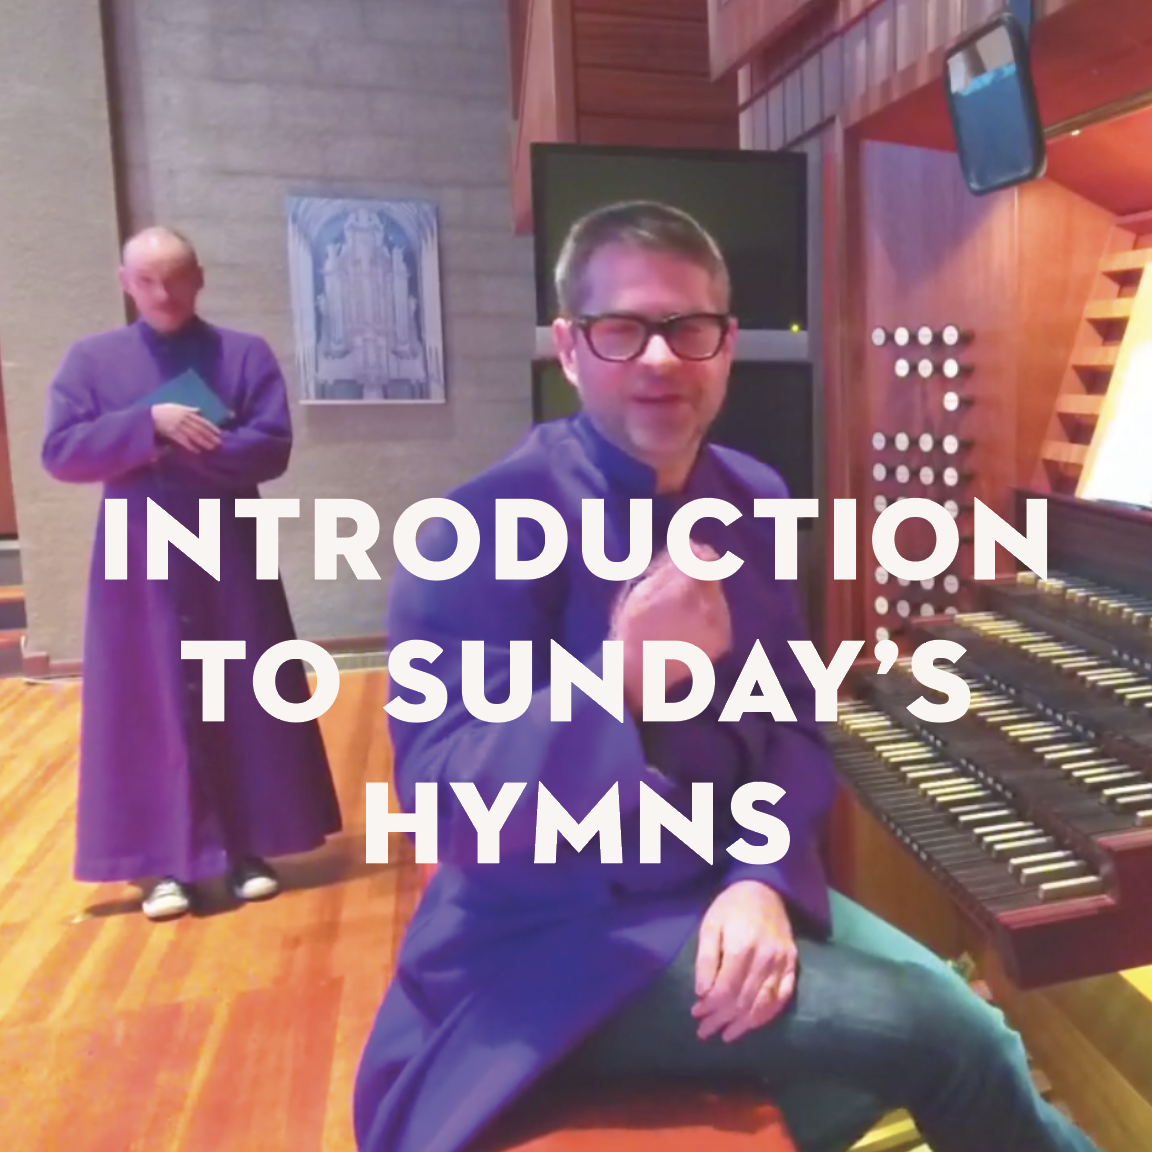 Introduction to Sunday’s Hymns: February 28, 2021